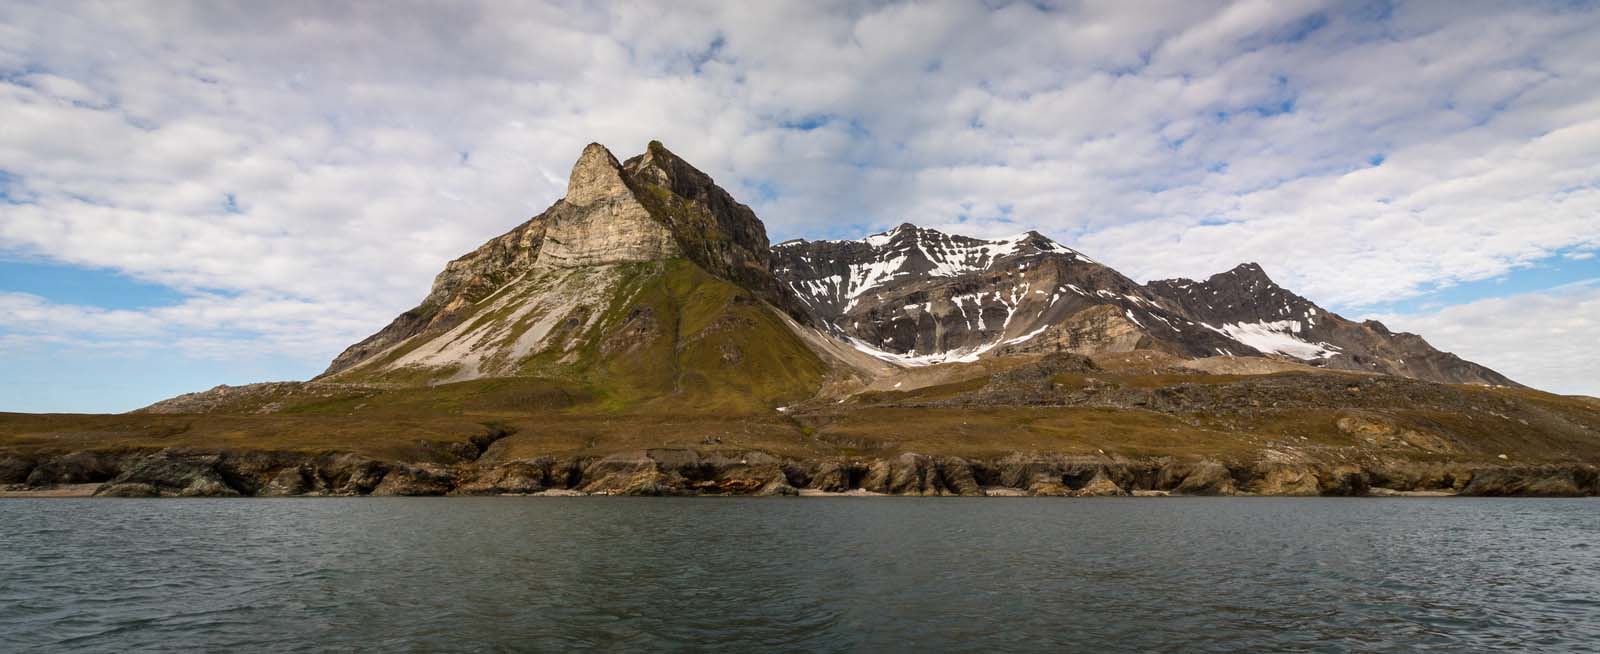 North Spitsbergen, In search of Polar Bear & Pack Ice - Summer Solstice